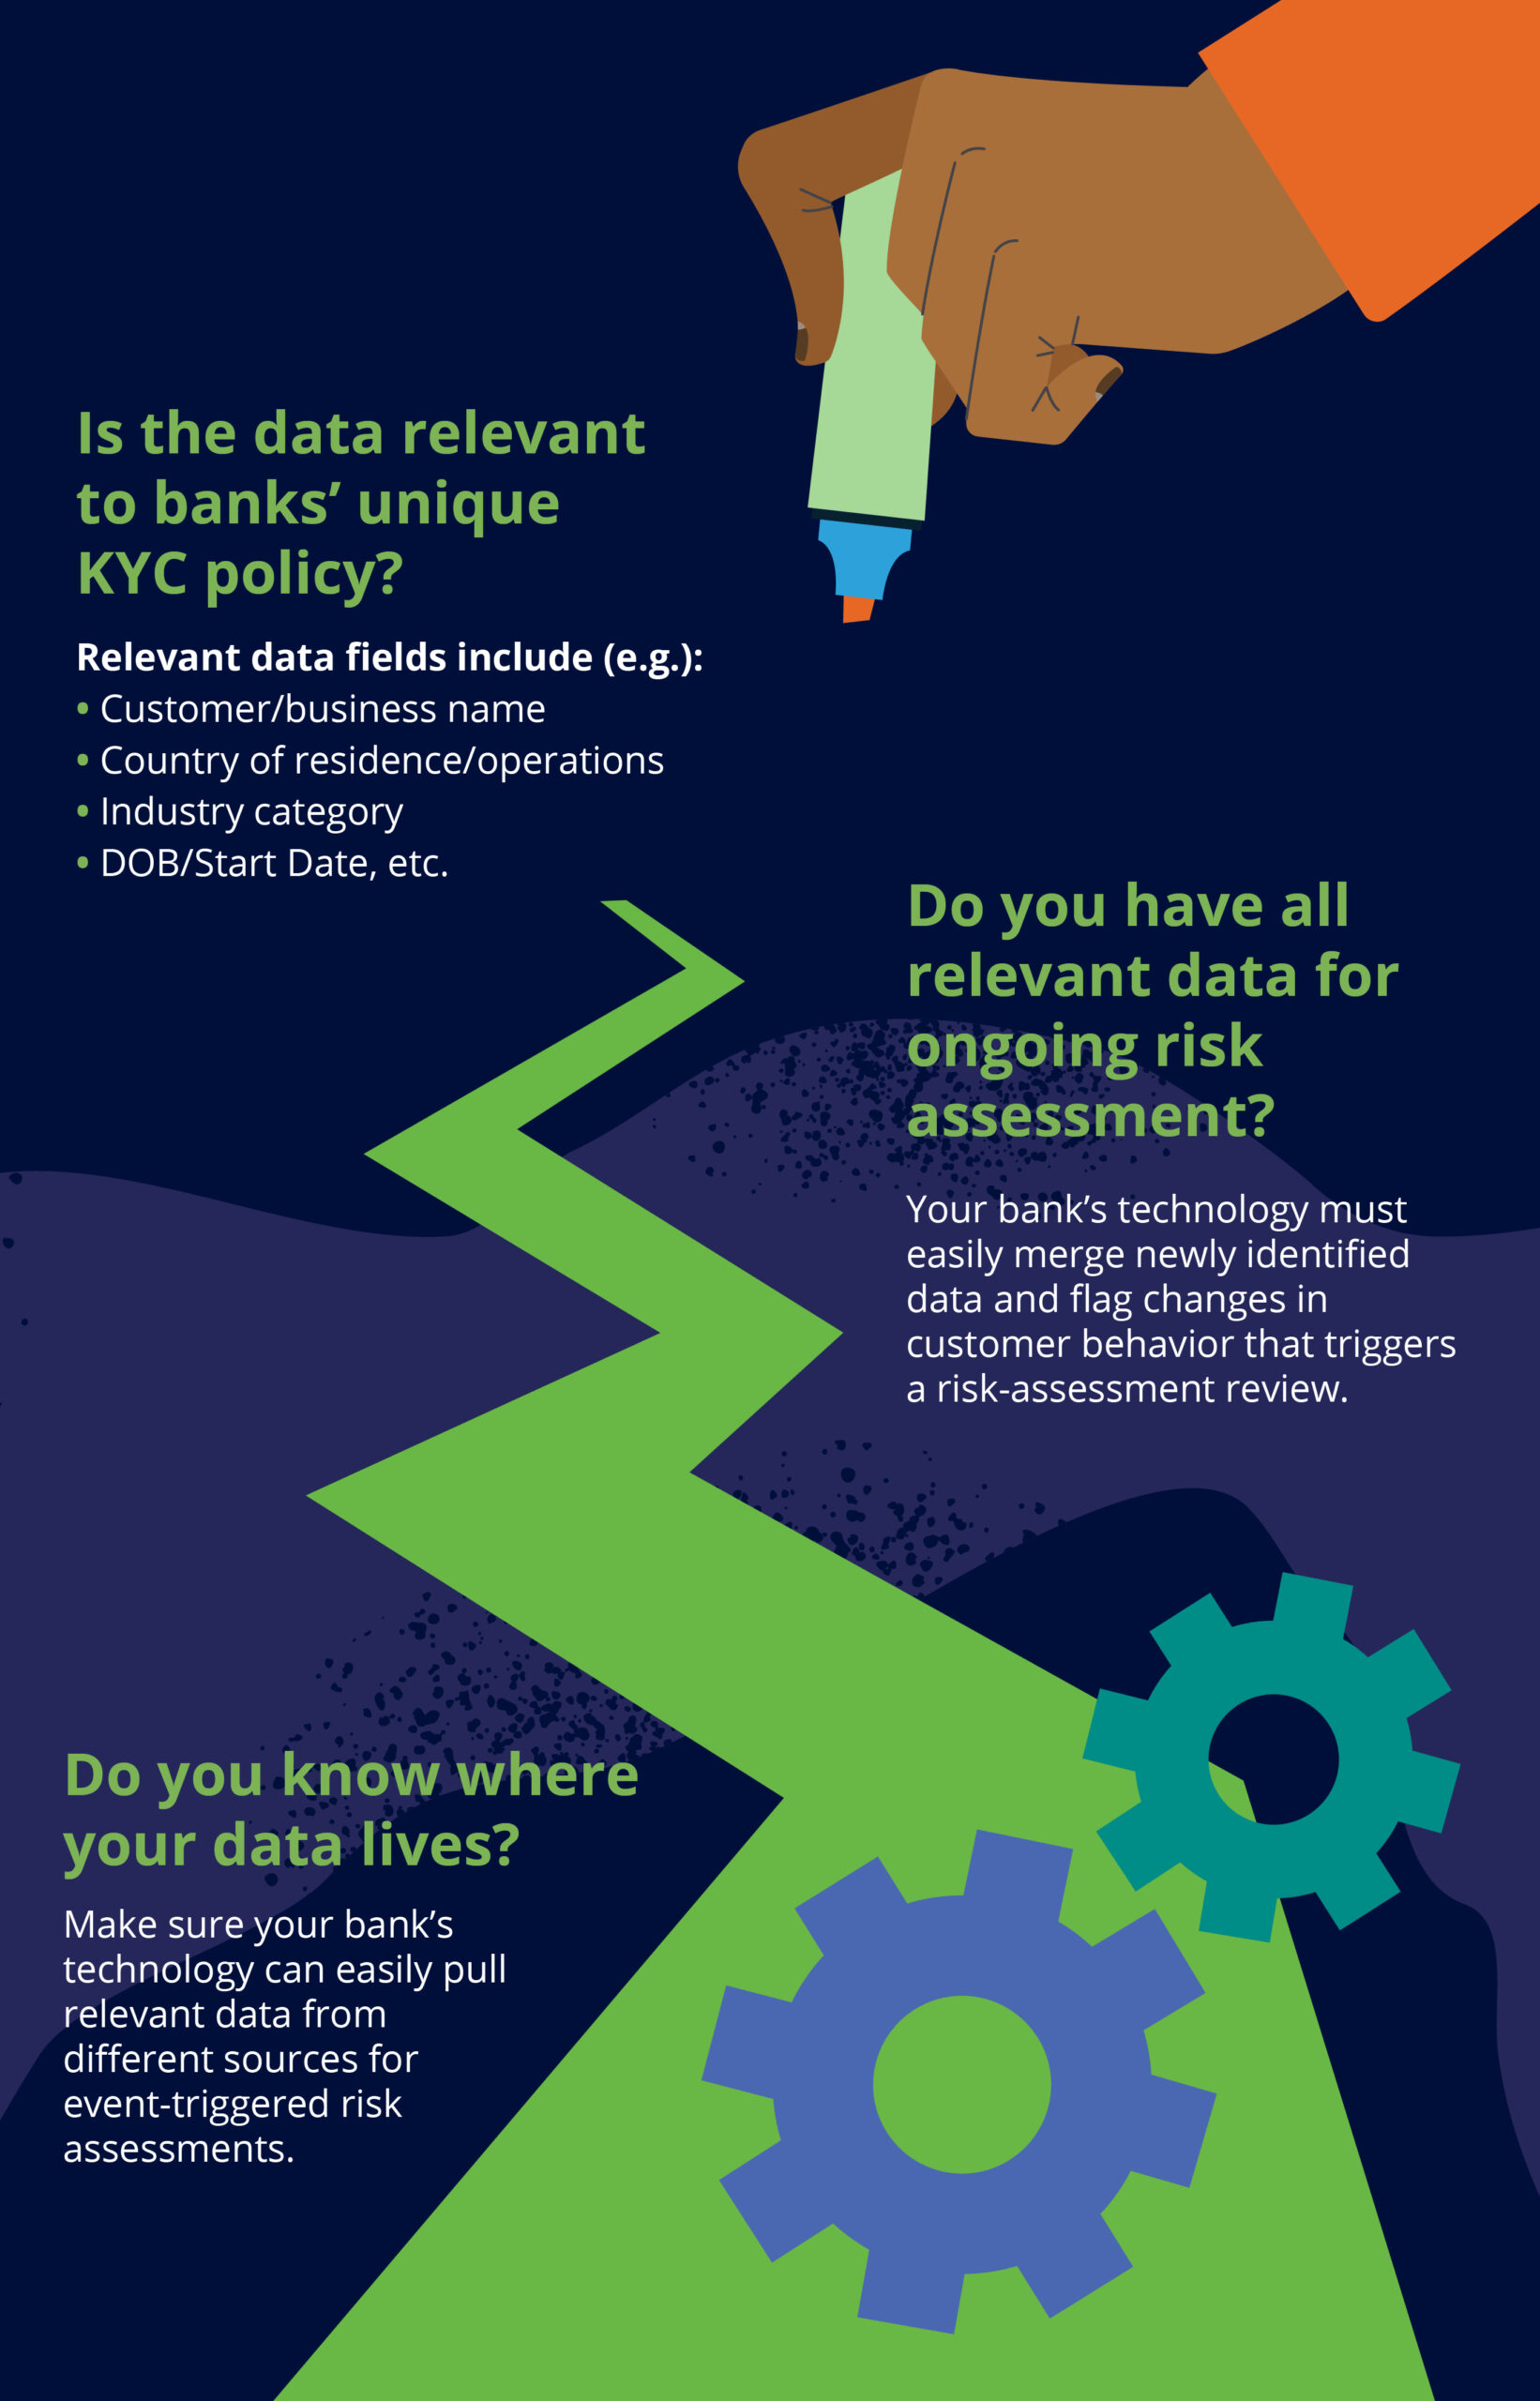 Image outlining 3 key questions banks should ask before getting started with pKYC, including: 1) Is the data relevant to banks’ unique KYC policy?; 2) Do you know where your data lives?; 3) Do you have all relevant data for ongoing risk assessment?